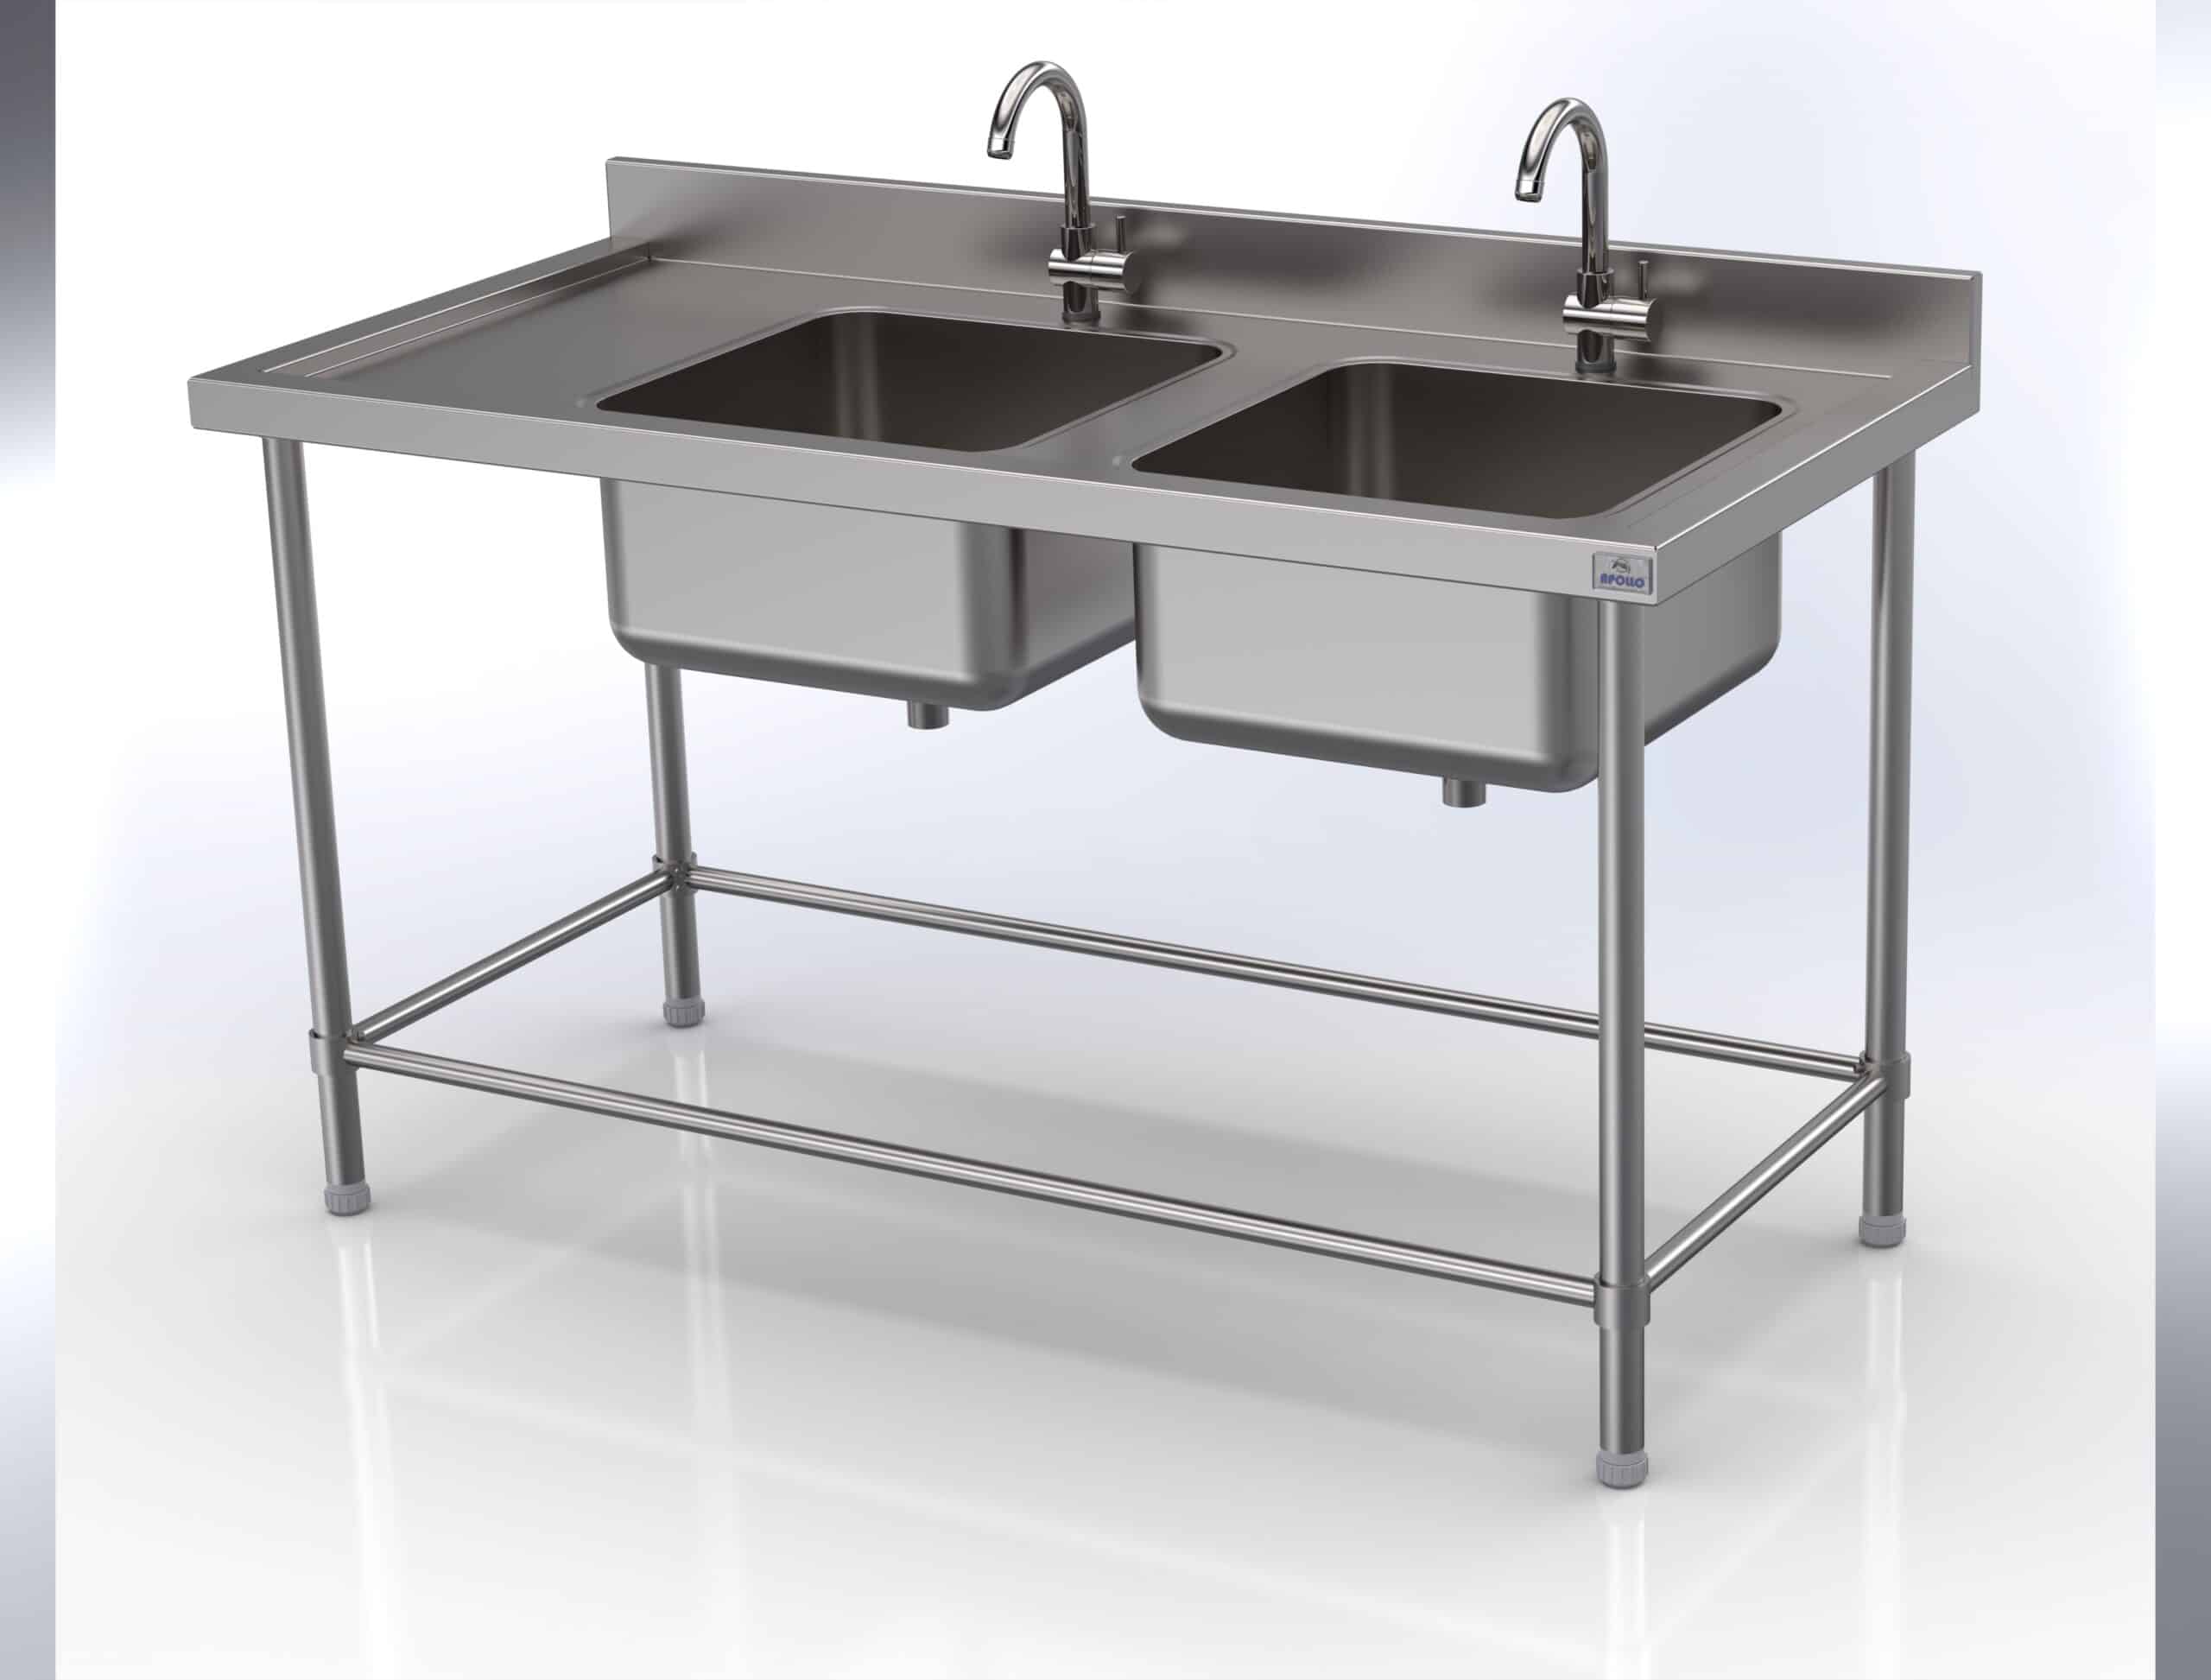 stainless steel kitchen work table india